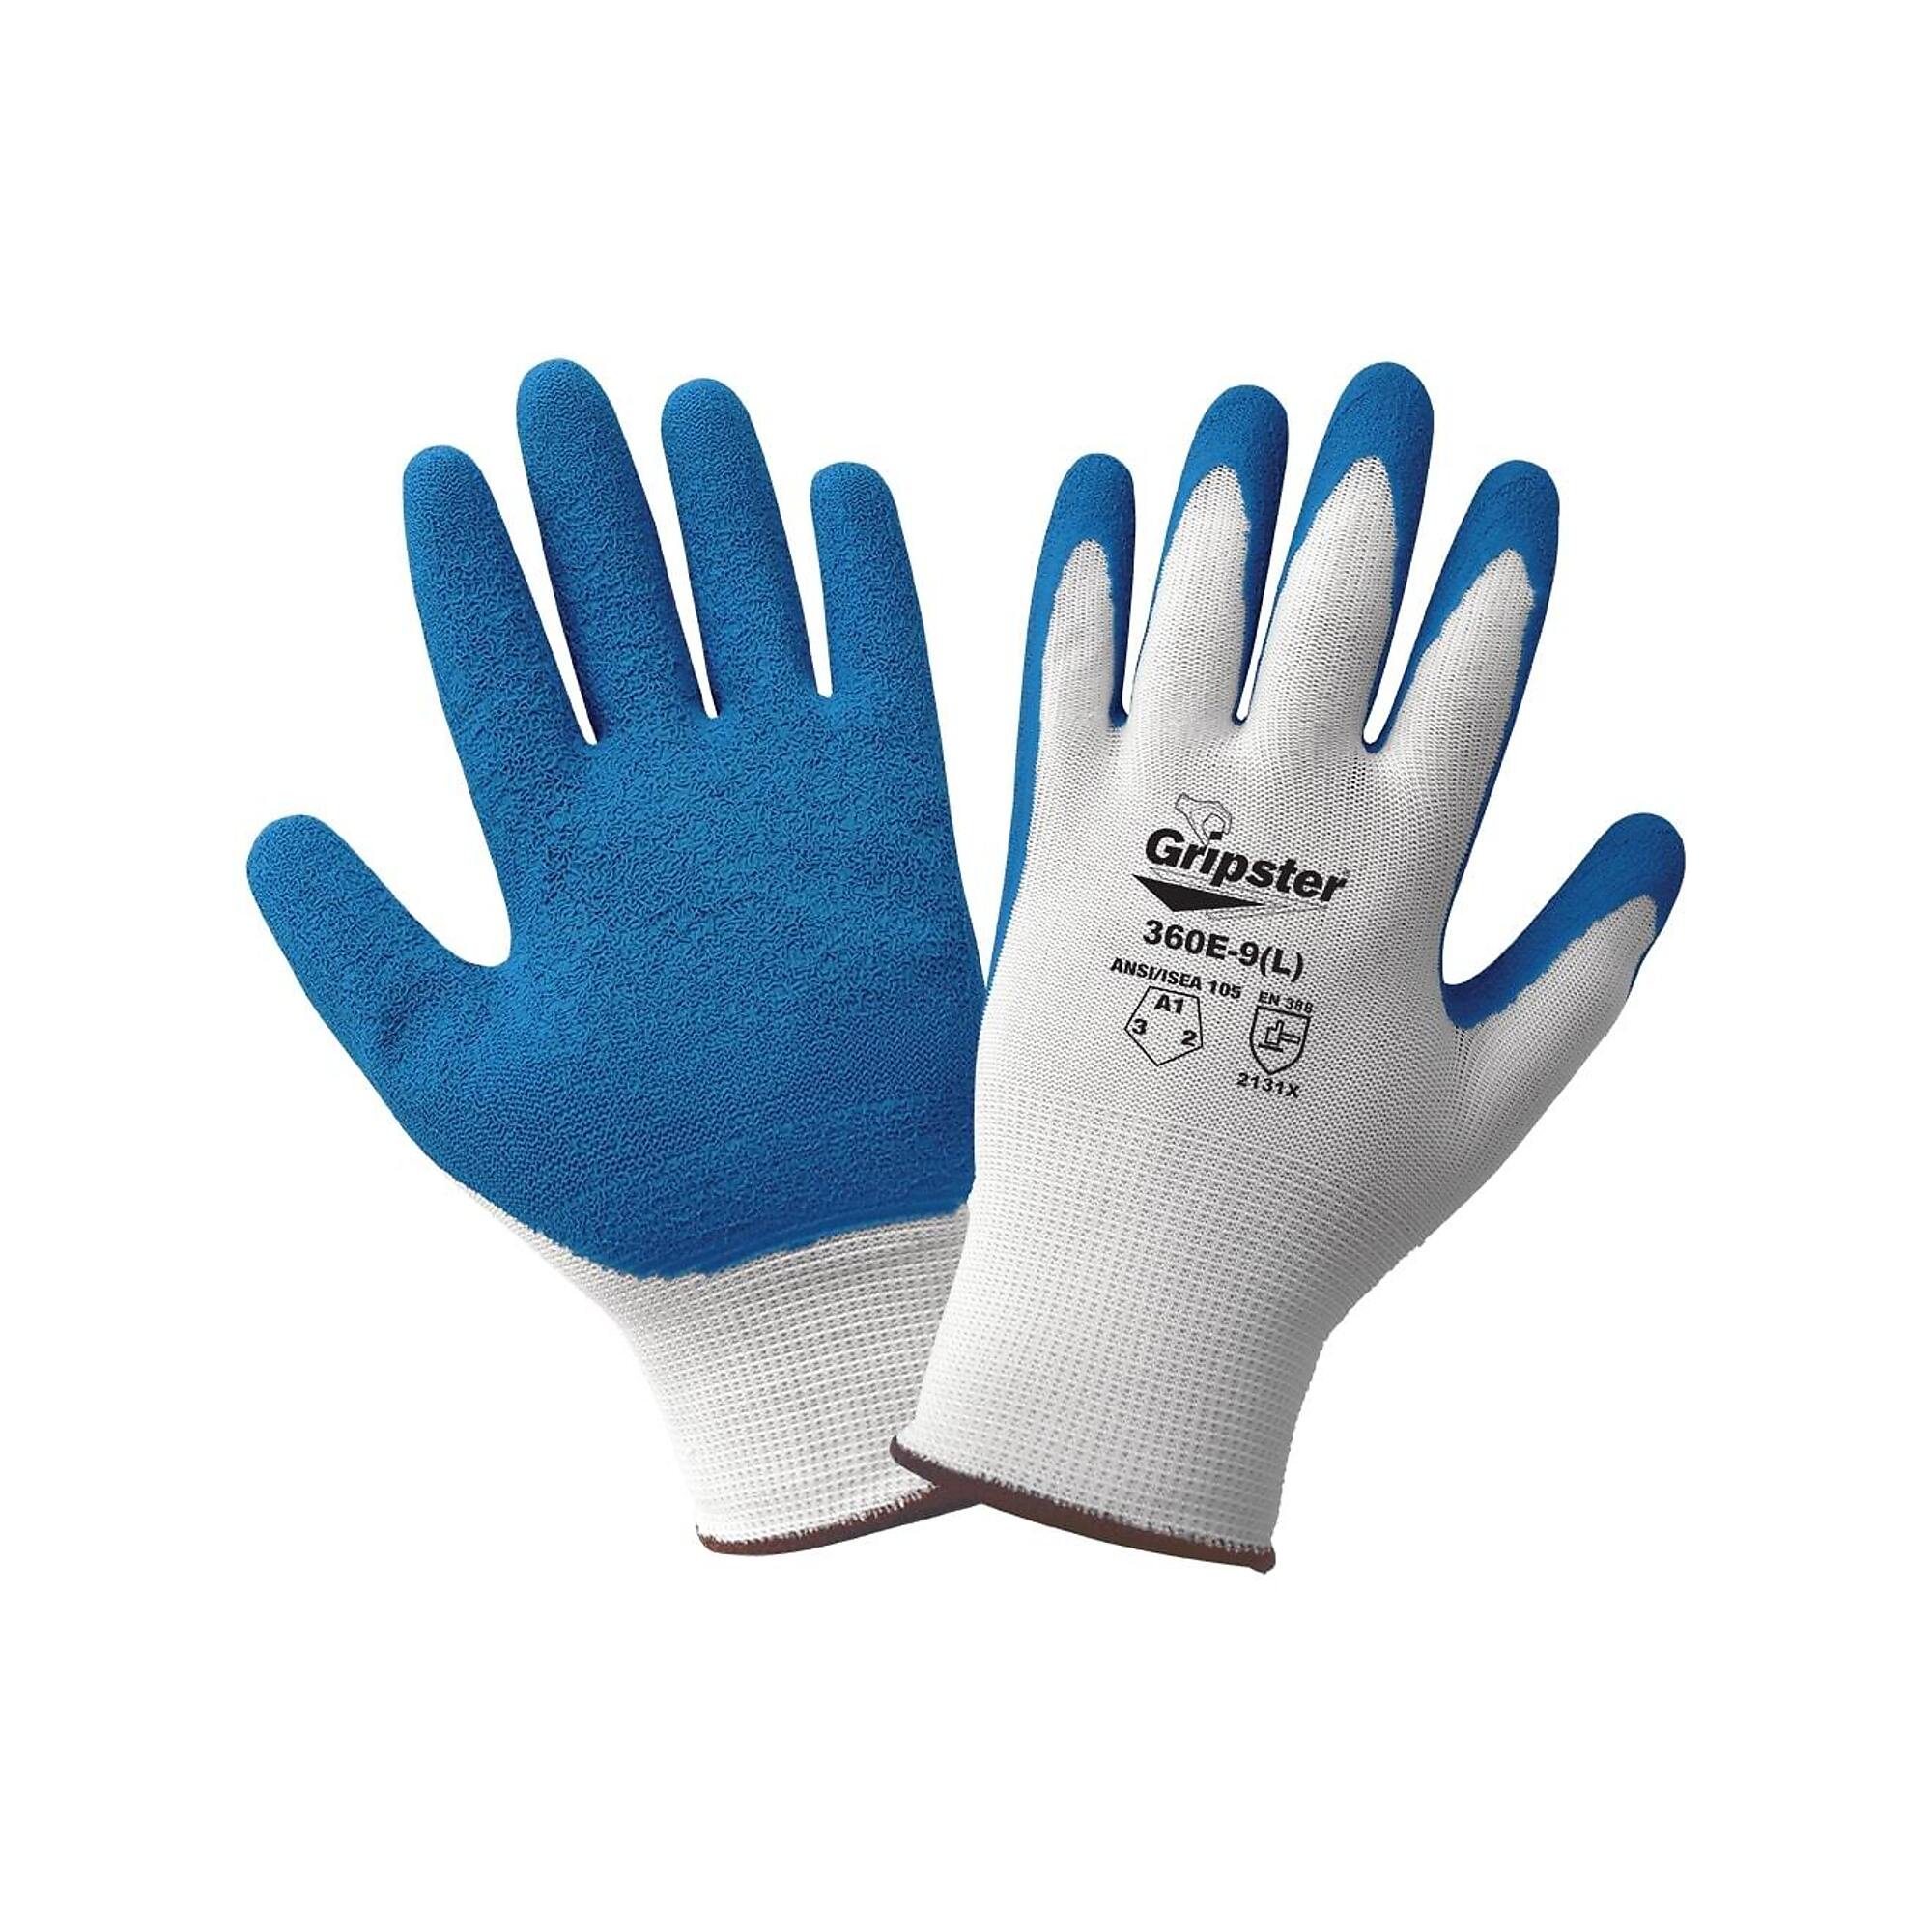 Global Glove Gripster , White, Blue Rub Coated, Cut Resistant A1 Gloves - 12 Pairs, Size XL, Color White/Blue, Included (qty.) 12 Model 360E-10(XL)